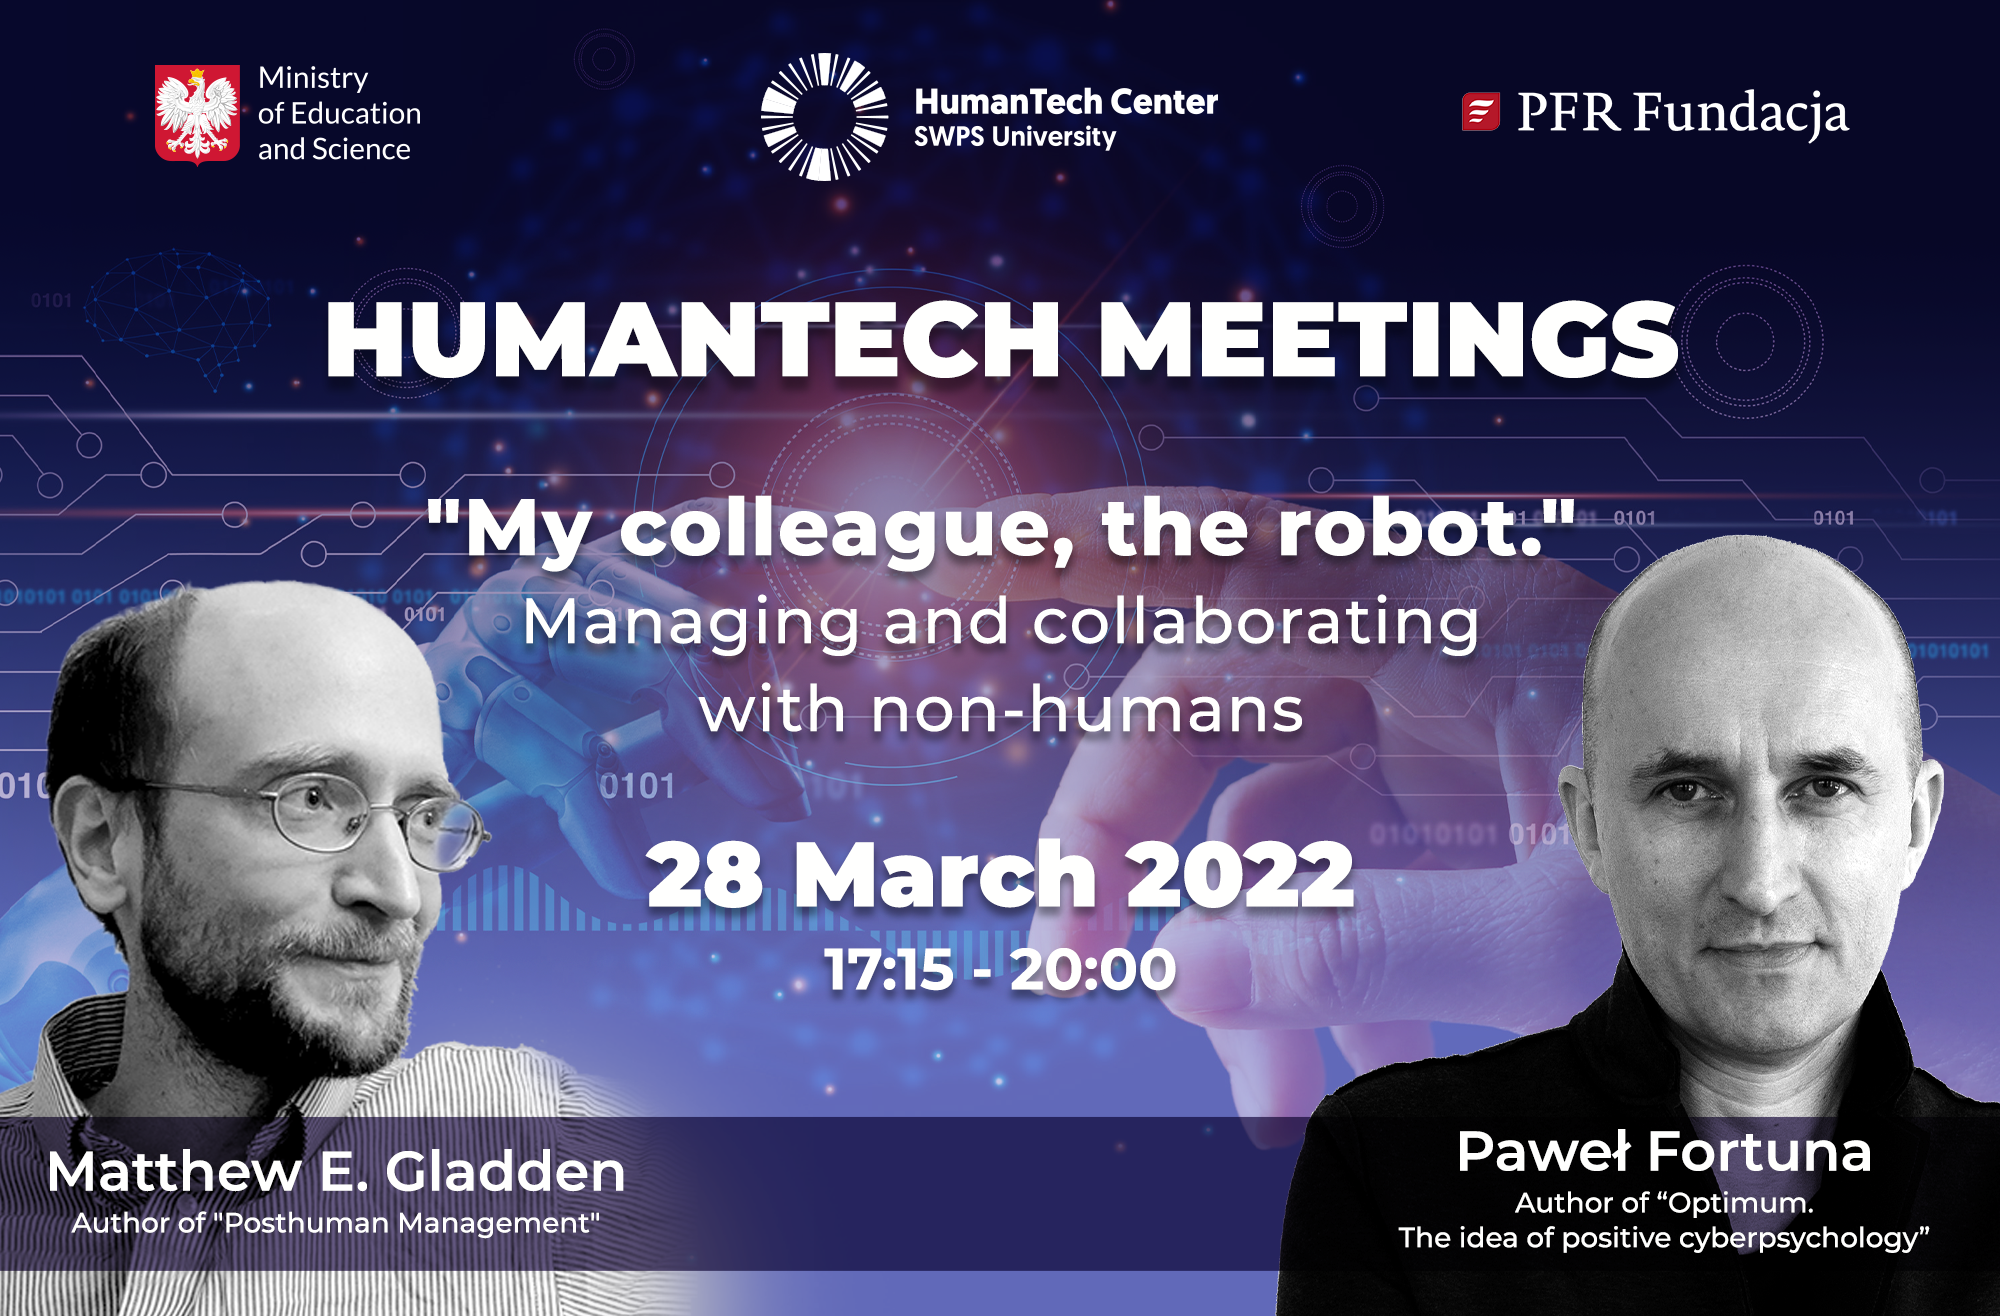 HumanTech Meetings II: My colleague, the robot. Managing and collaborating with non-humans